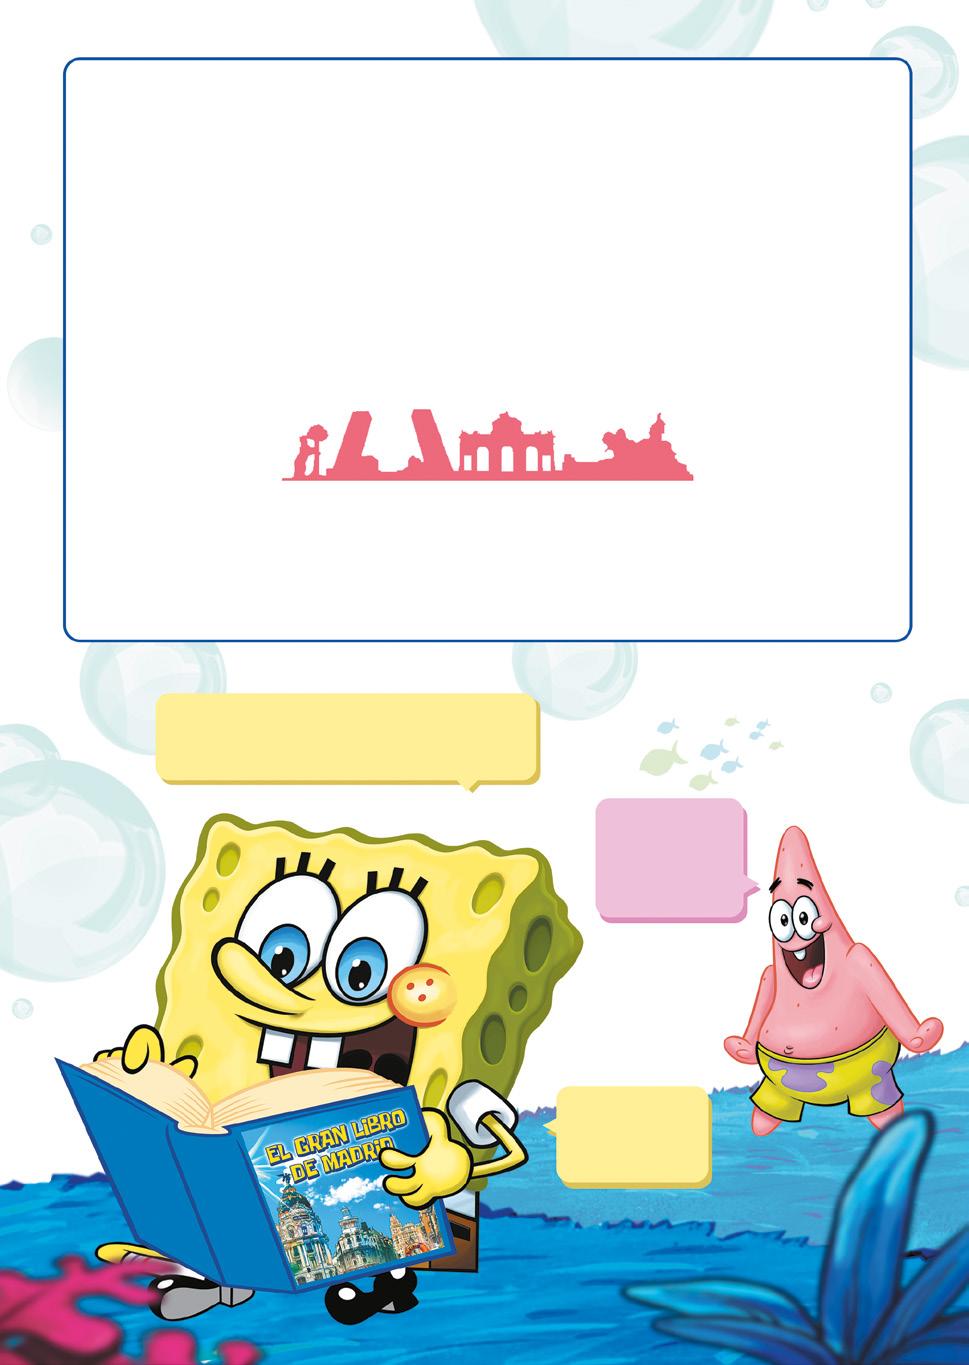 SpongeBob, your favourite Nickelodeon character is discovering the wonderful city of Madrid and all its treasures.